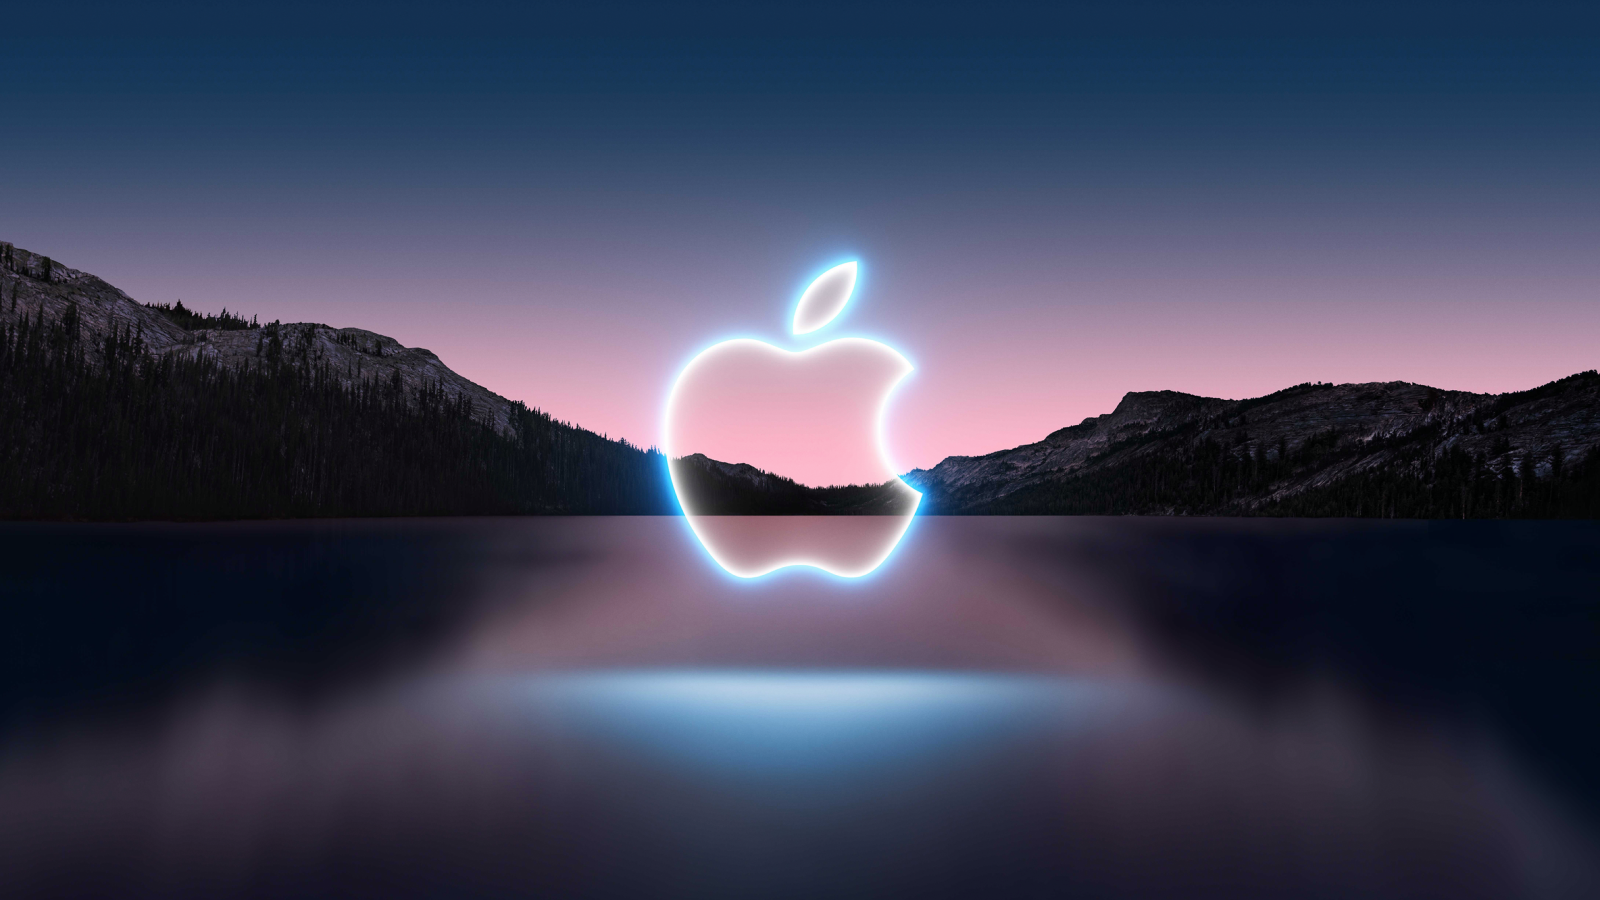 Get California streamin' with these Apple Event themed wallpapers